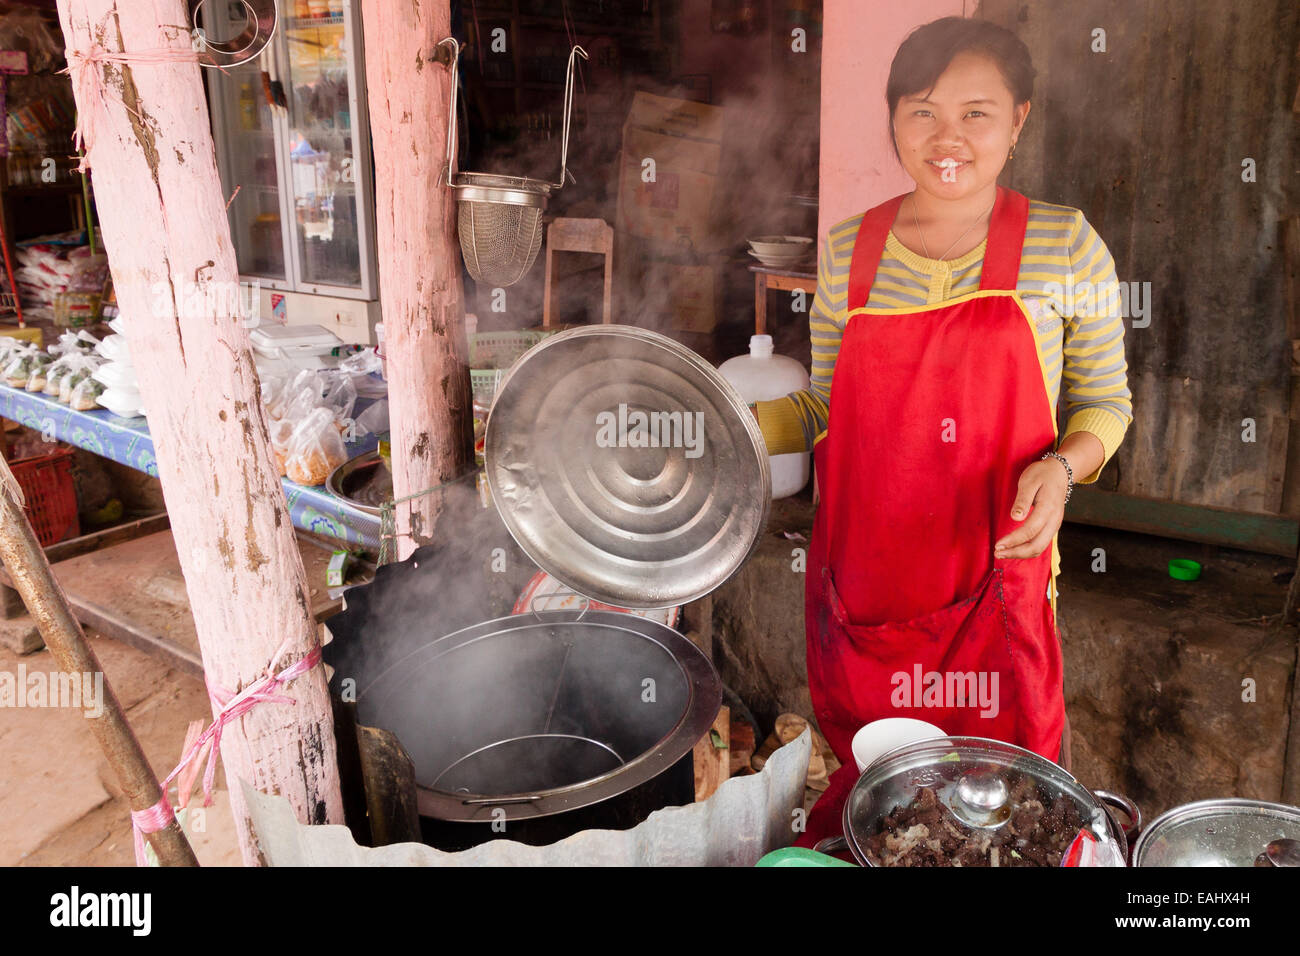 A Lao woman cooking street food Stock Photo